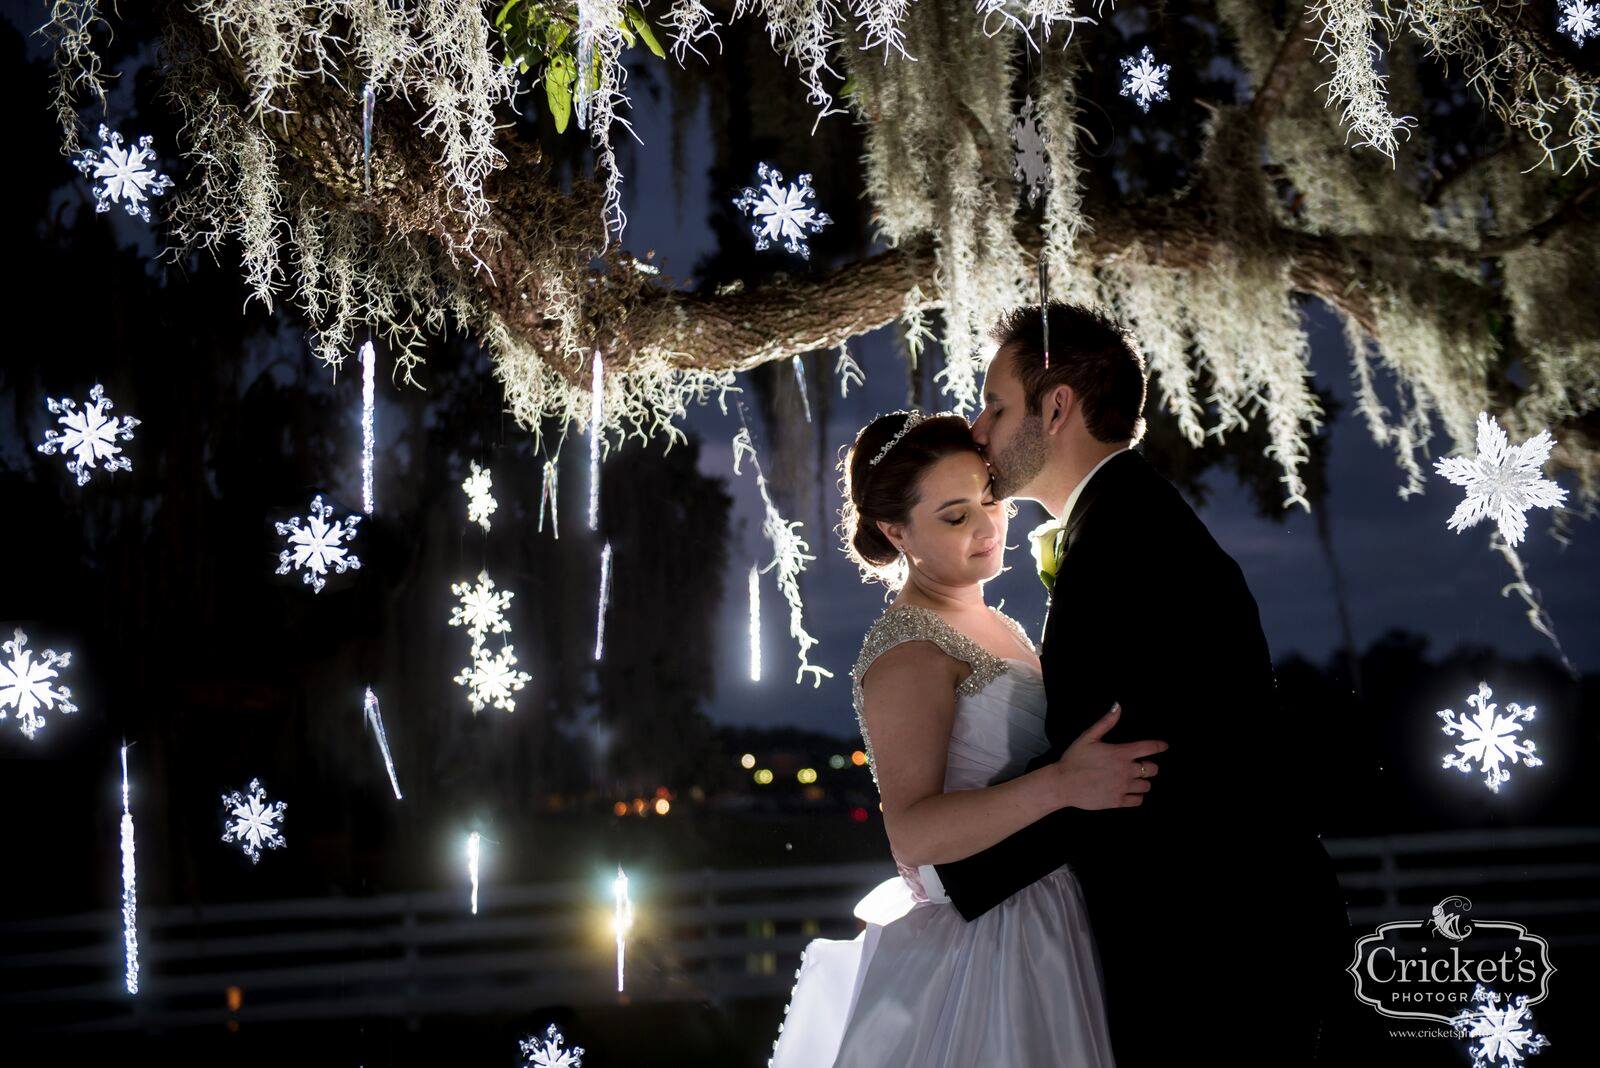 bride and groom holding each other under a tree at night